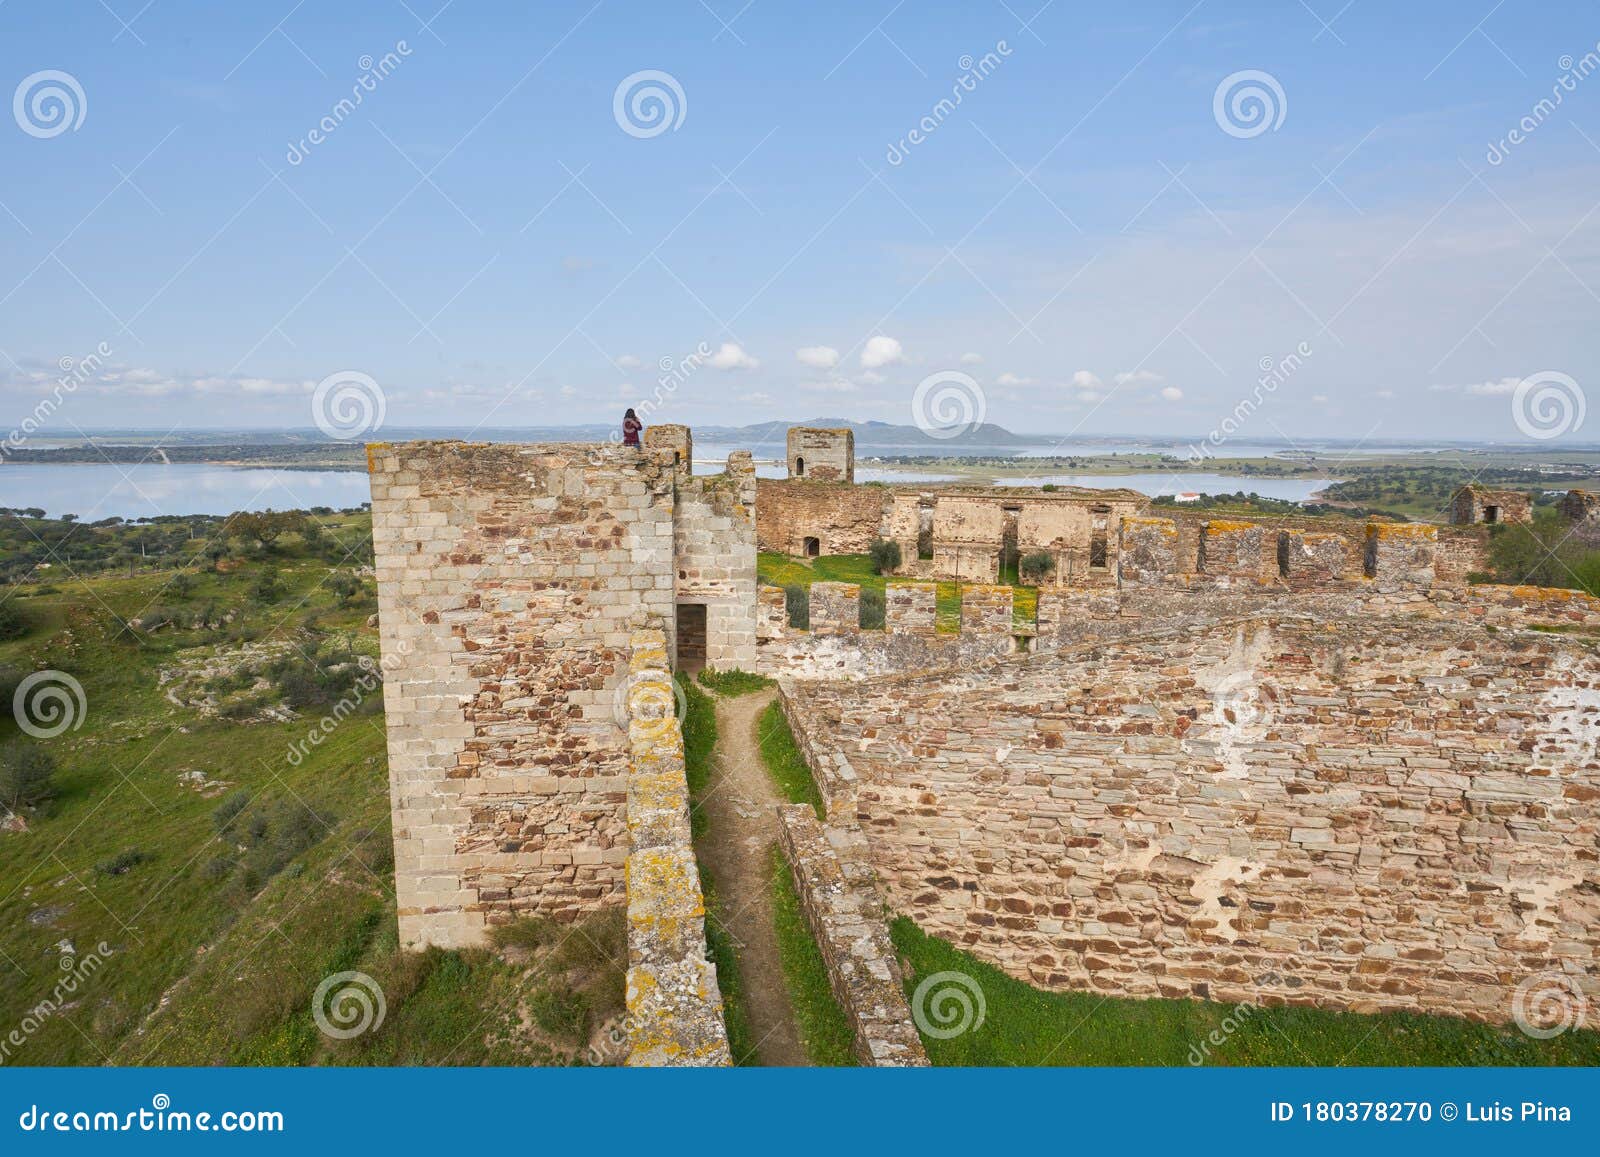 woman girl traveler in mourao castle towers and wall historic building in alentejo, portugal